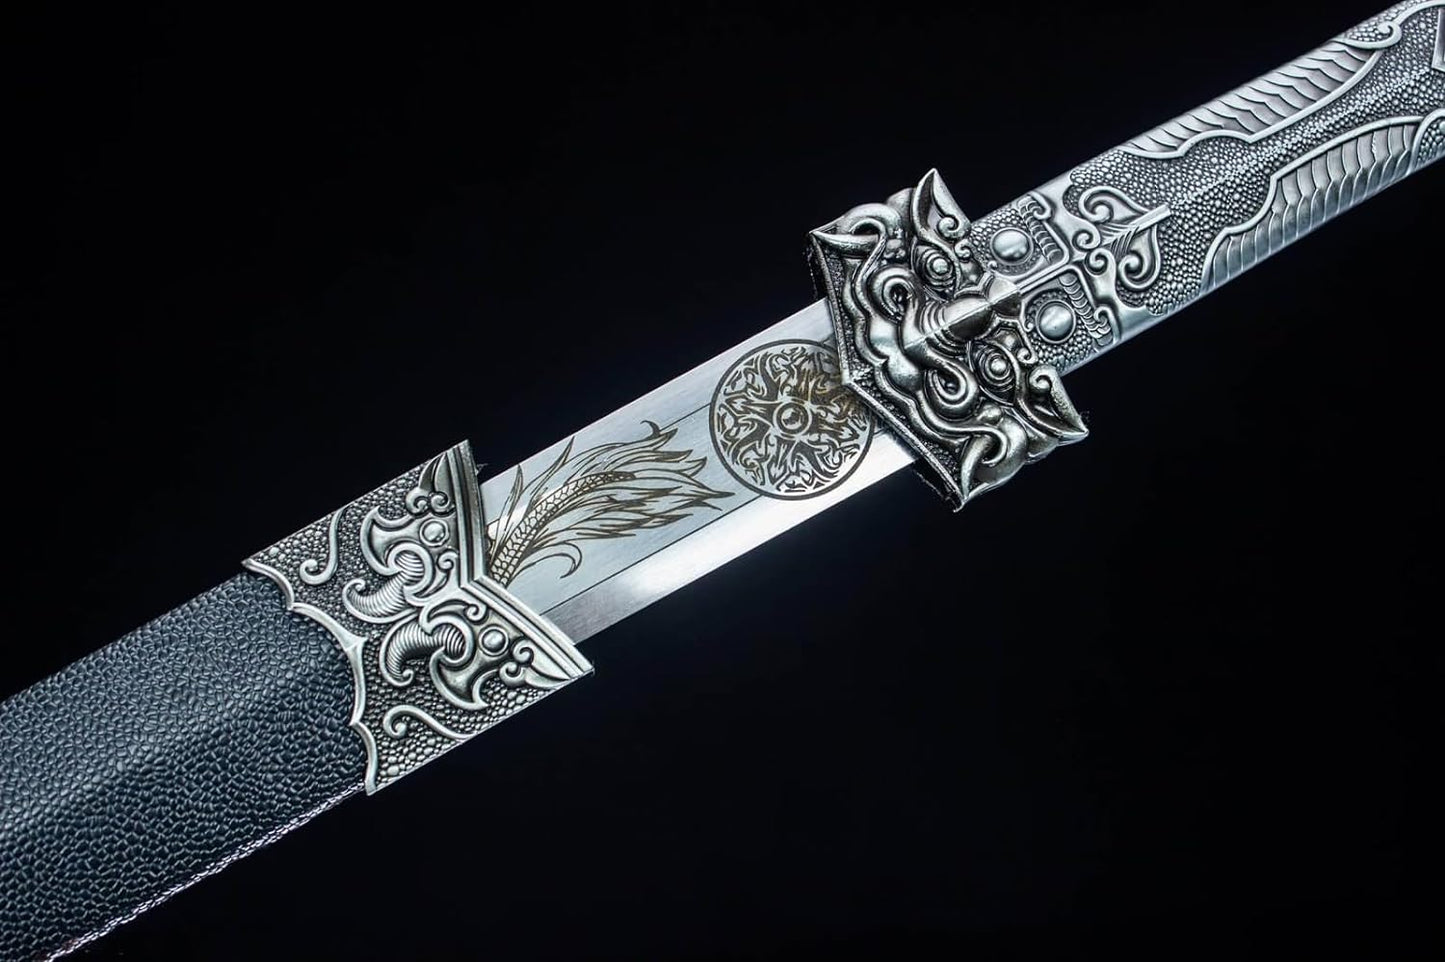 Dragon Han Sword,Forged High Carbon Steel Etch Blade,Fake Leather Scabbard